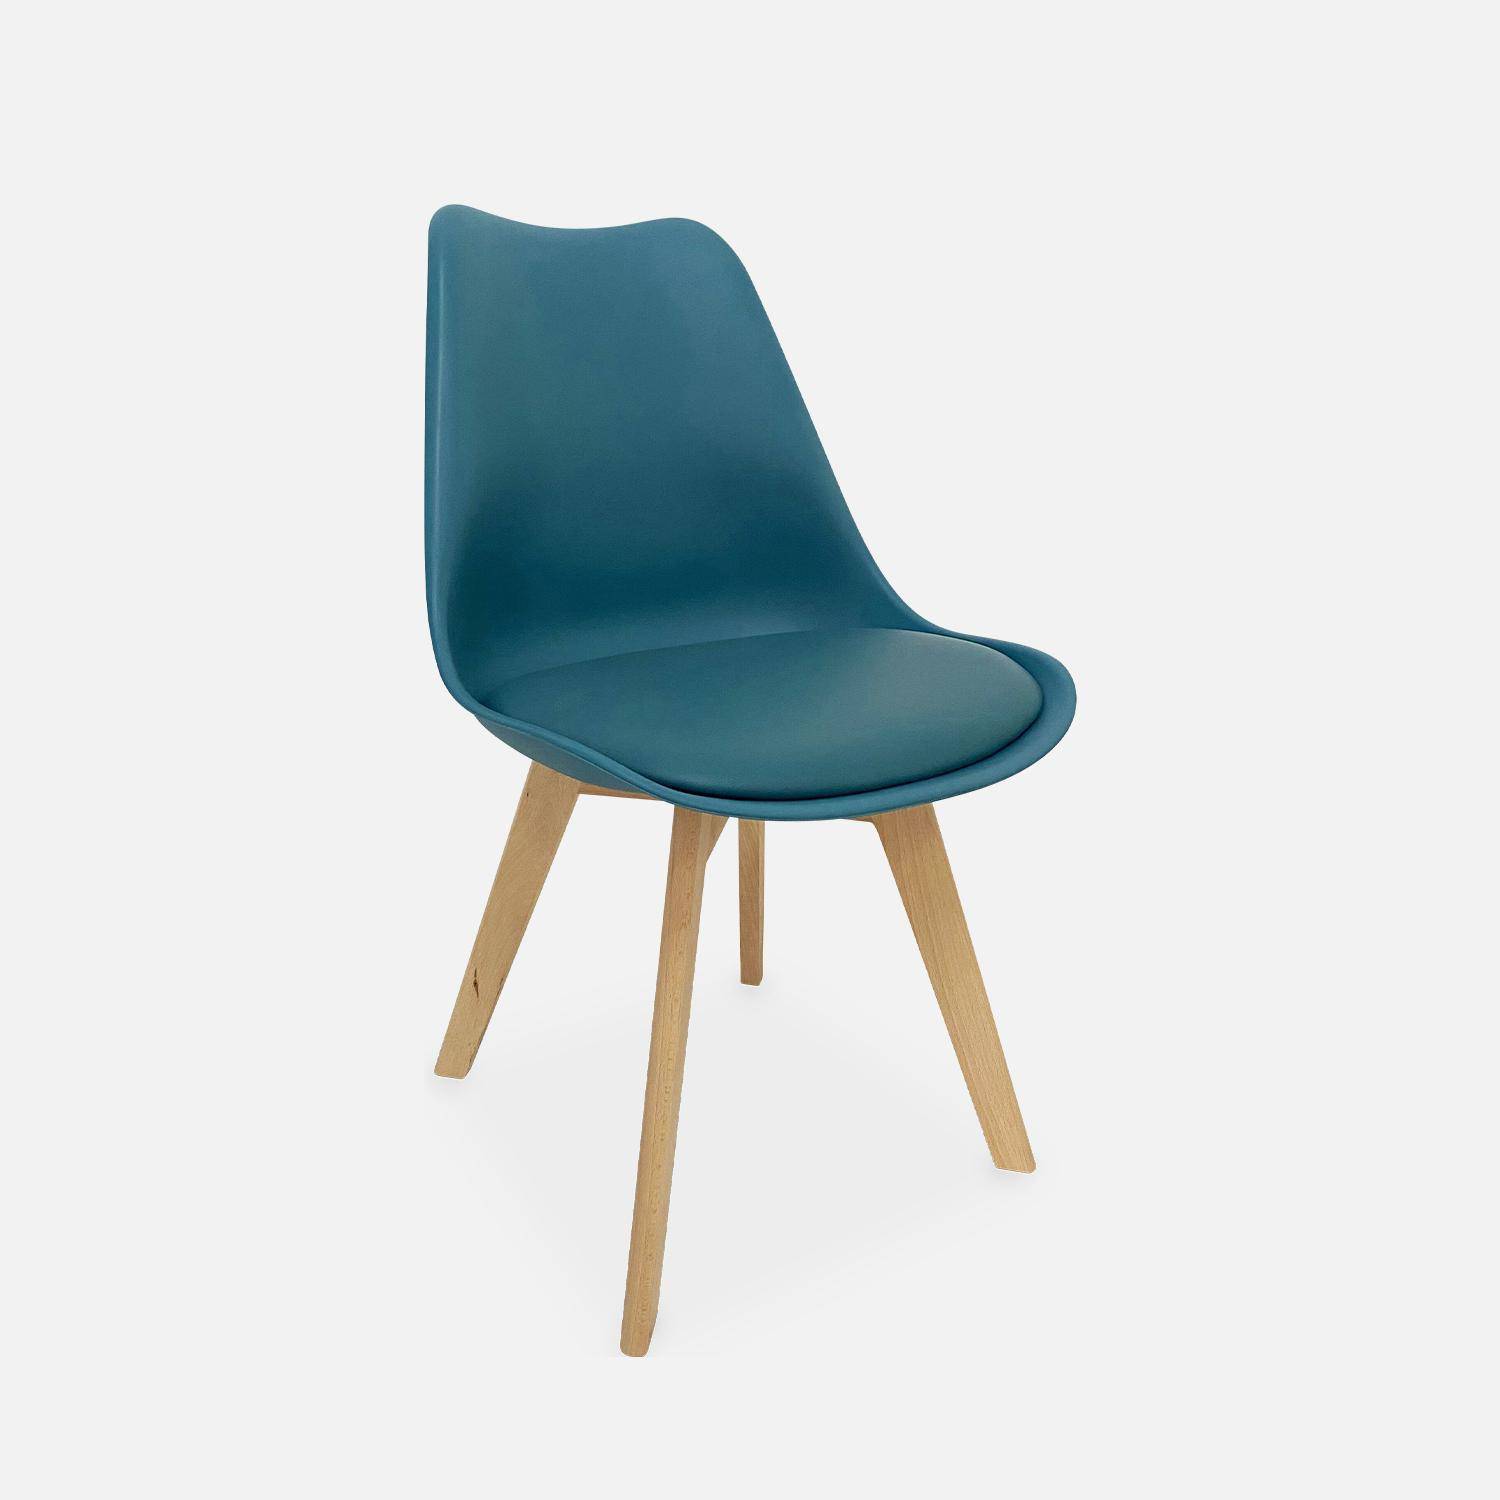 Pair of scandi-style faux-leather dining chair, blue, L49 x D55 x H81cm, NILS,sweeek,Photo2